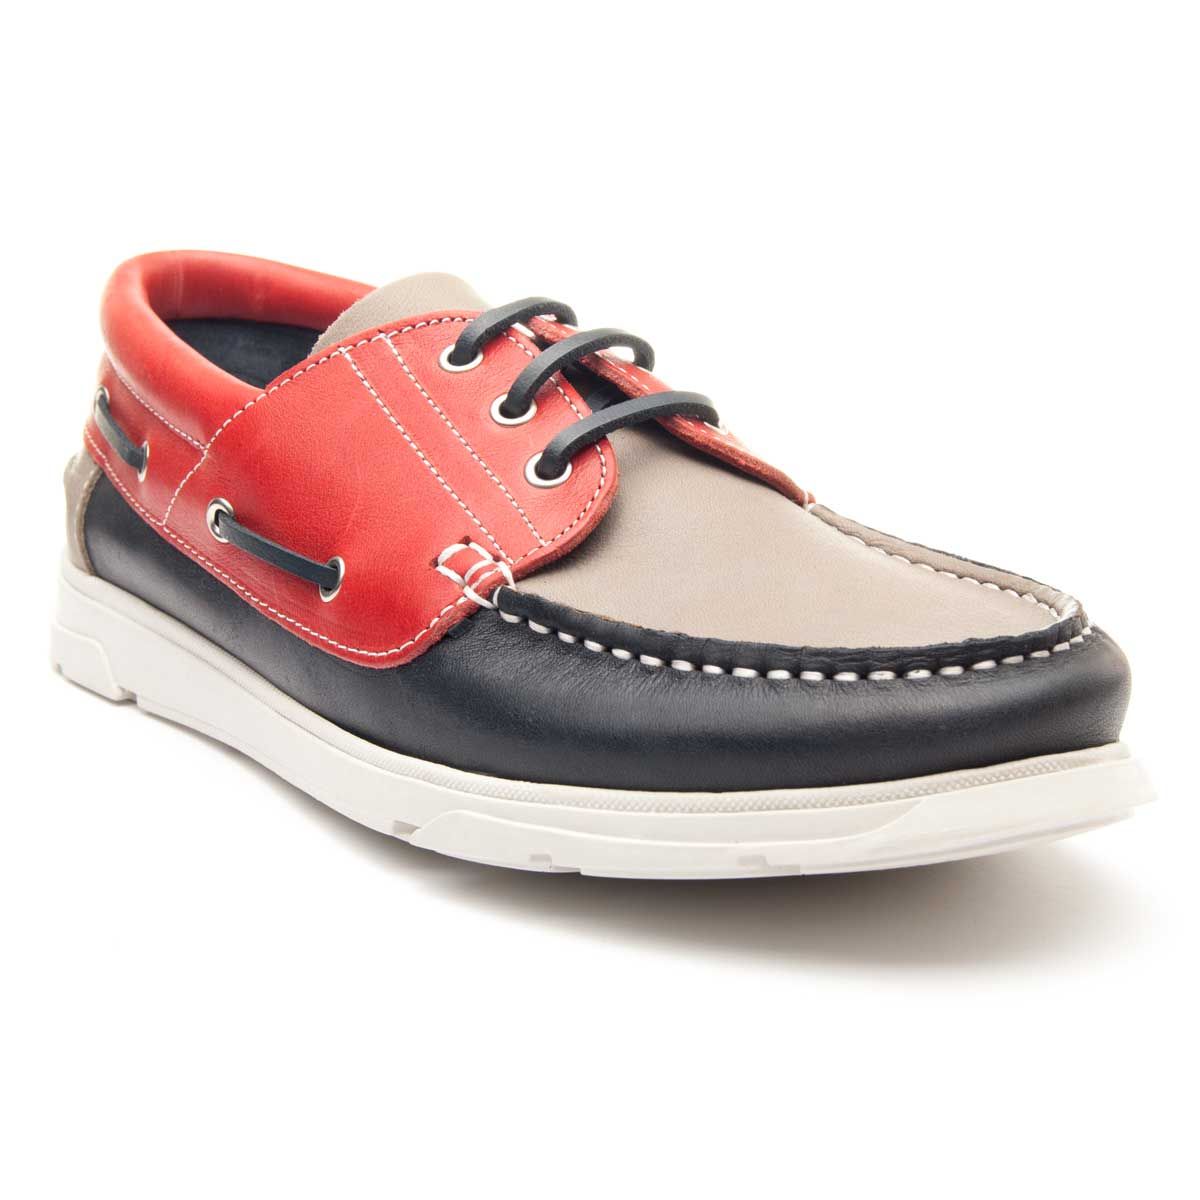 Capsula collection Nautica by Keelan. The idea of ​​this collection is that you get maximum comfort during the summer if you are one of those who like classics. We present this nautical tricolor with cords, fully manufactured in first quality natural leather. Easy to clean and care. Horm Comfortable, which adapts perfectly to the foot. Anti-slip rubber floor and flexible, in white, to give an original and special touch. Undoubtedly a shoe that can not be missing in your closet. Made in Spain.